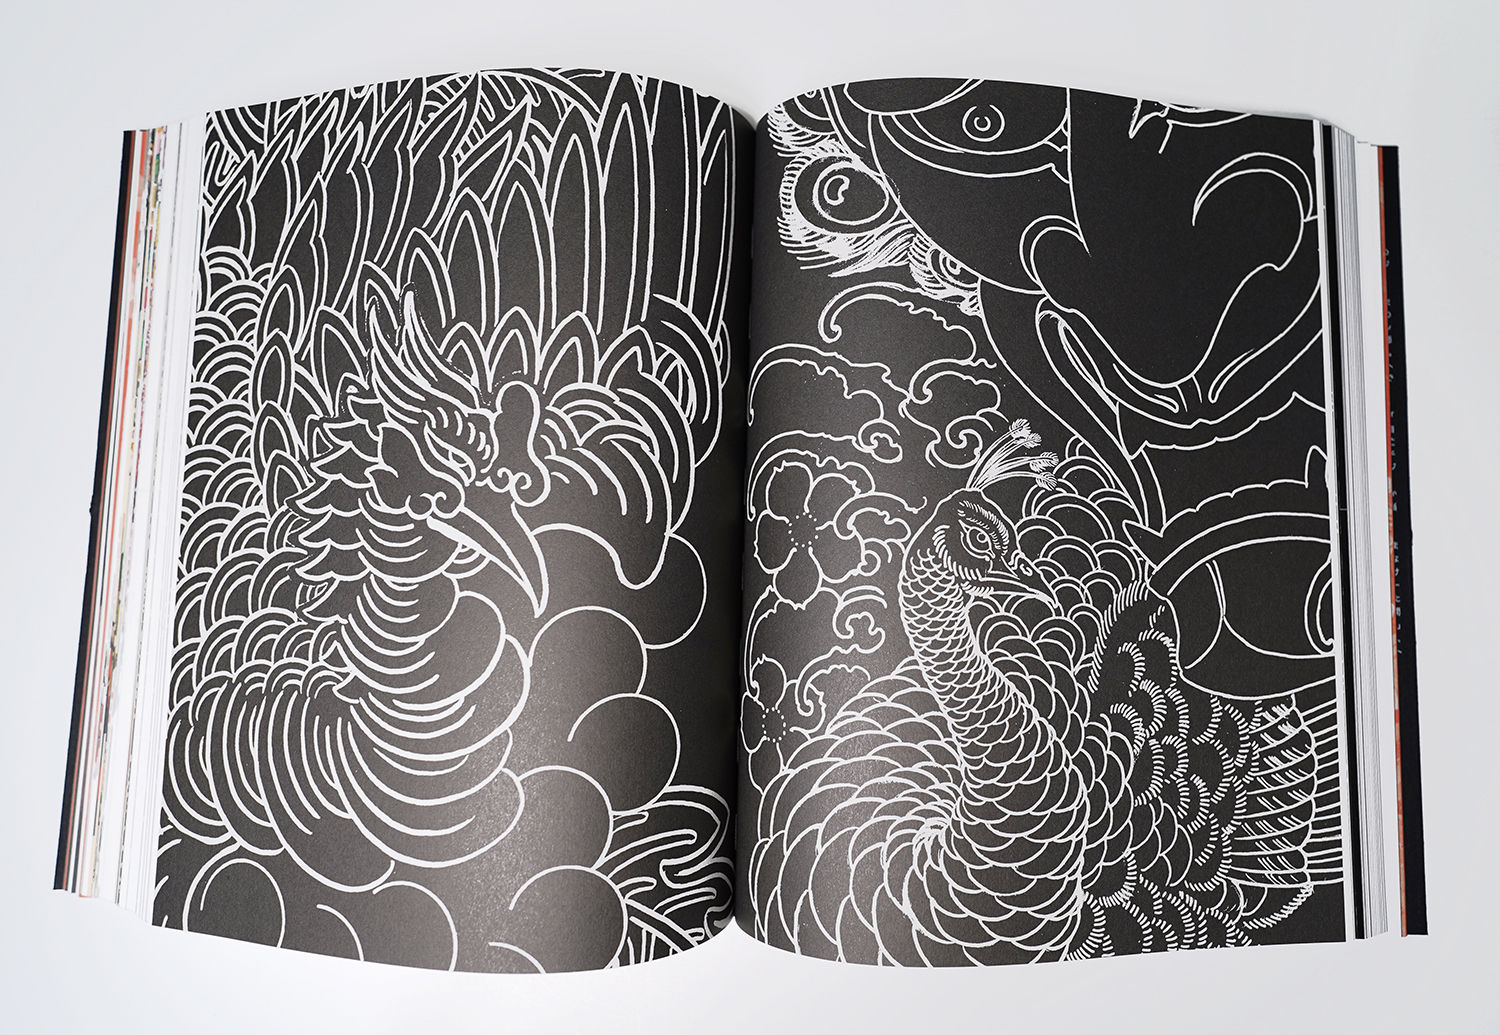 hand drawn line art by shane tan, peacock, white on black background, print book